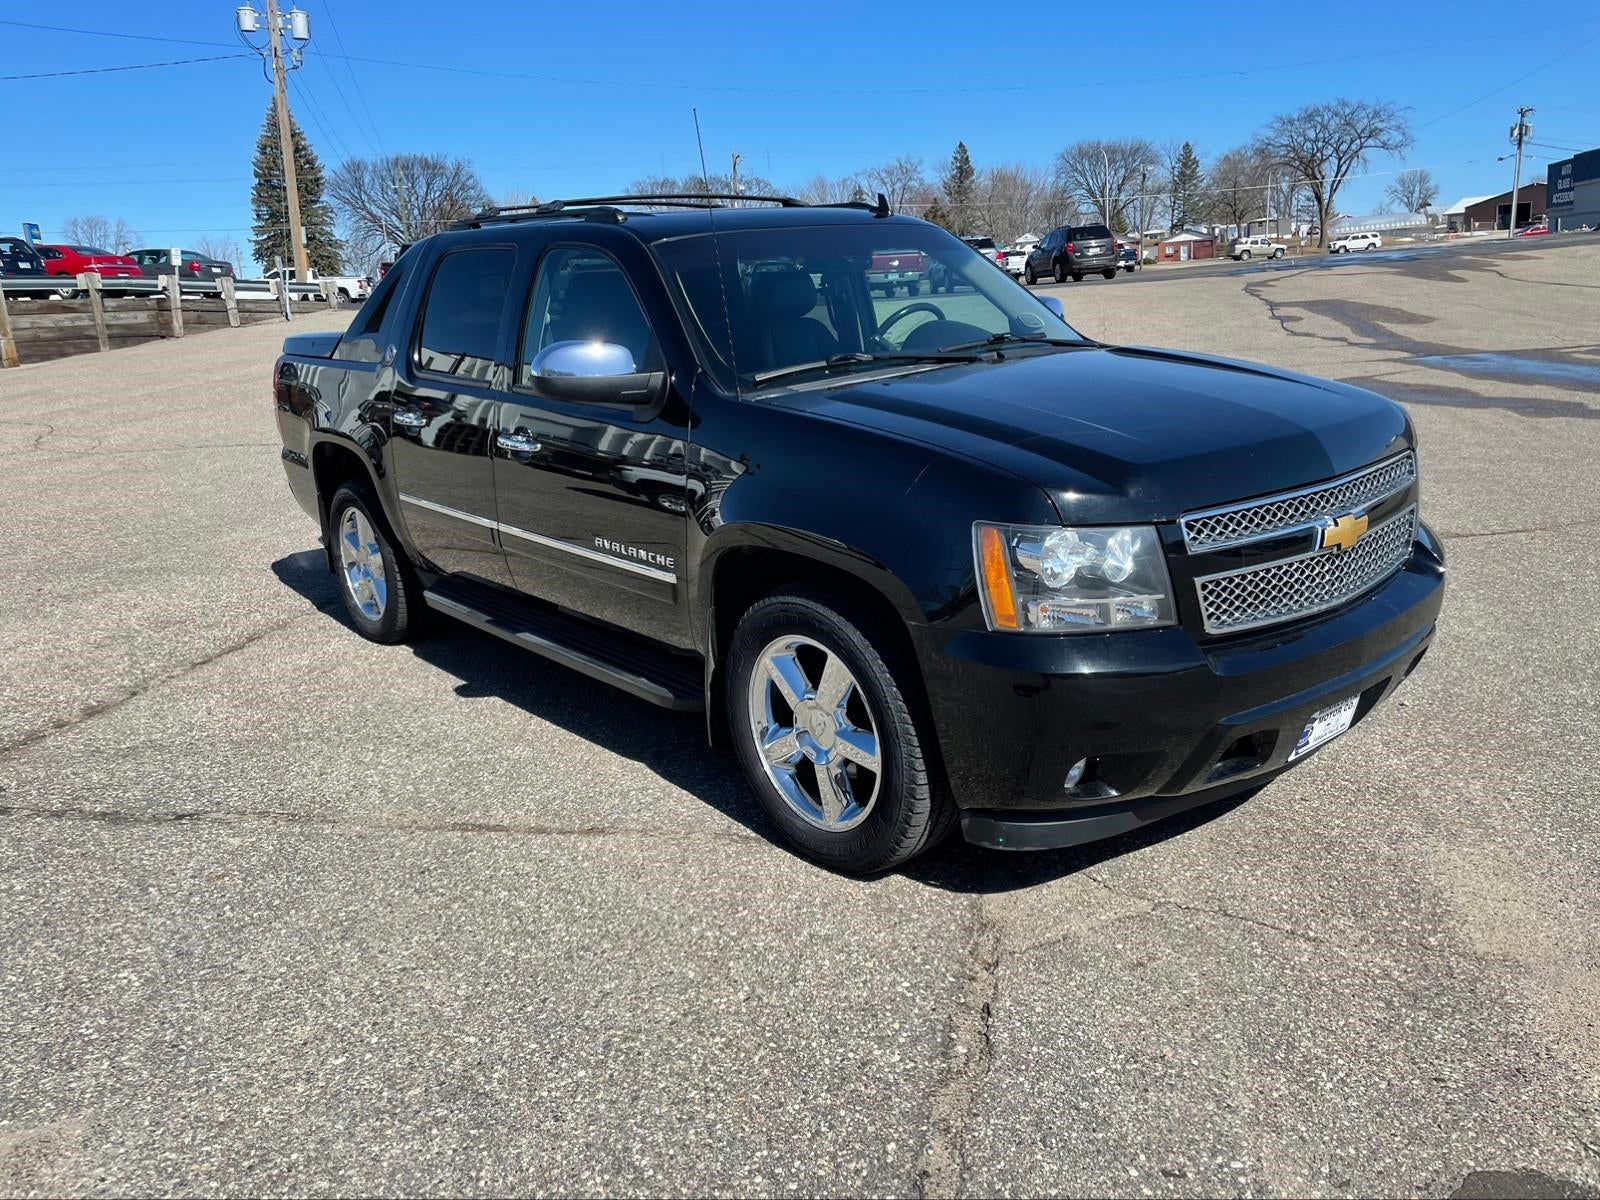 Used 2013 Chevrolet Avalanche LTZ with VIN 3GNTKGE75DG179800 for sale in Fergus Falls, Minnesota